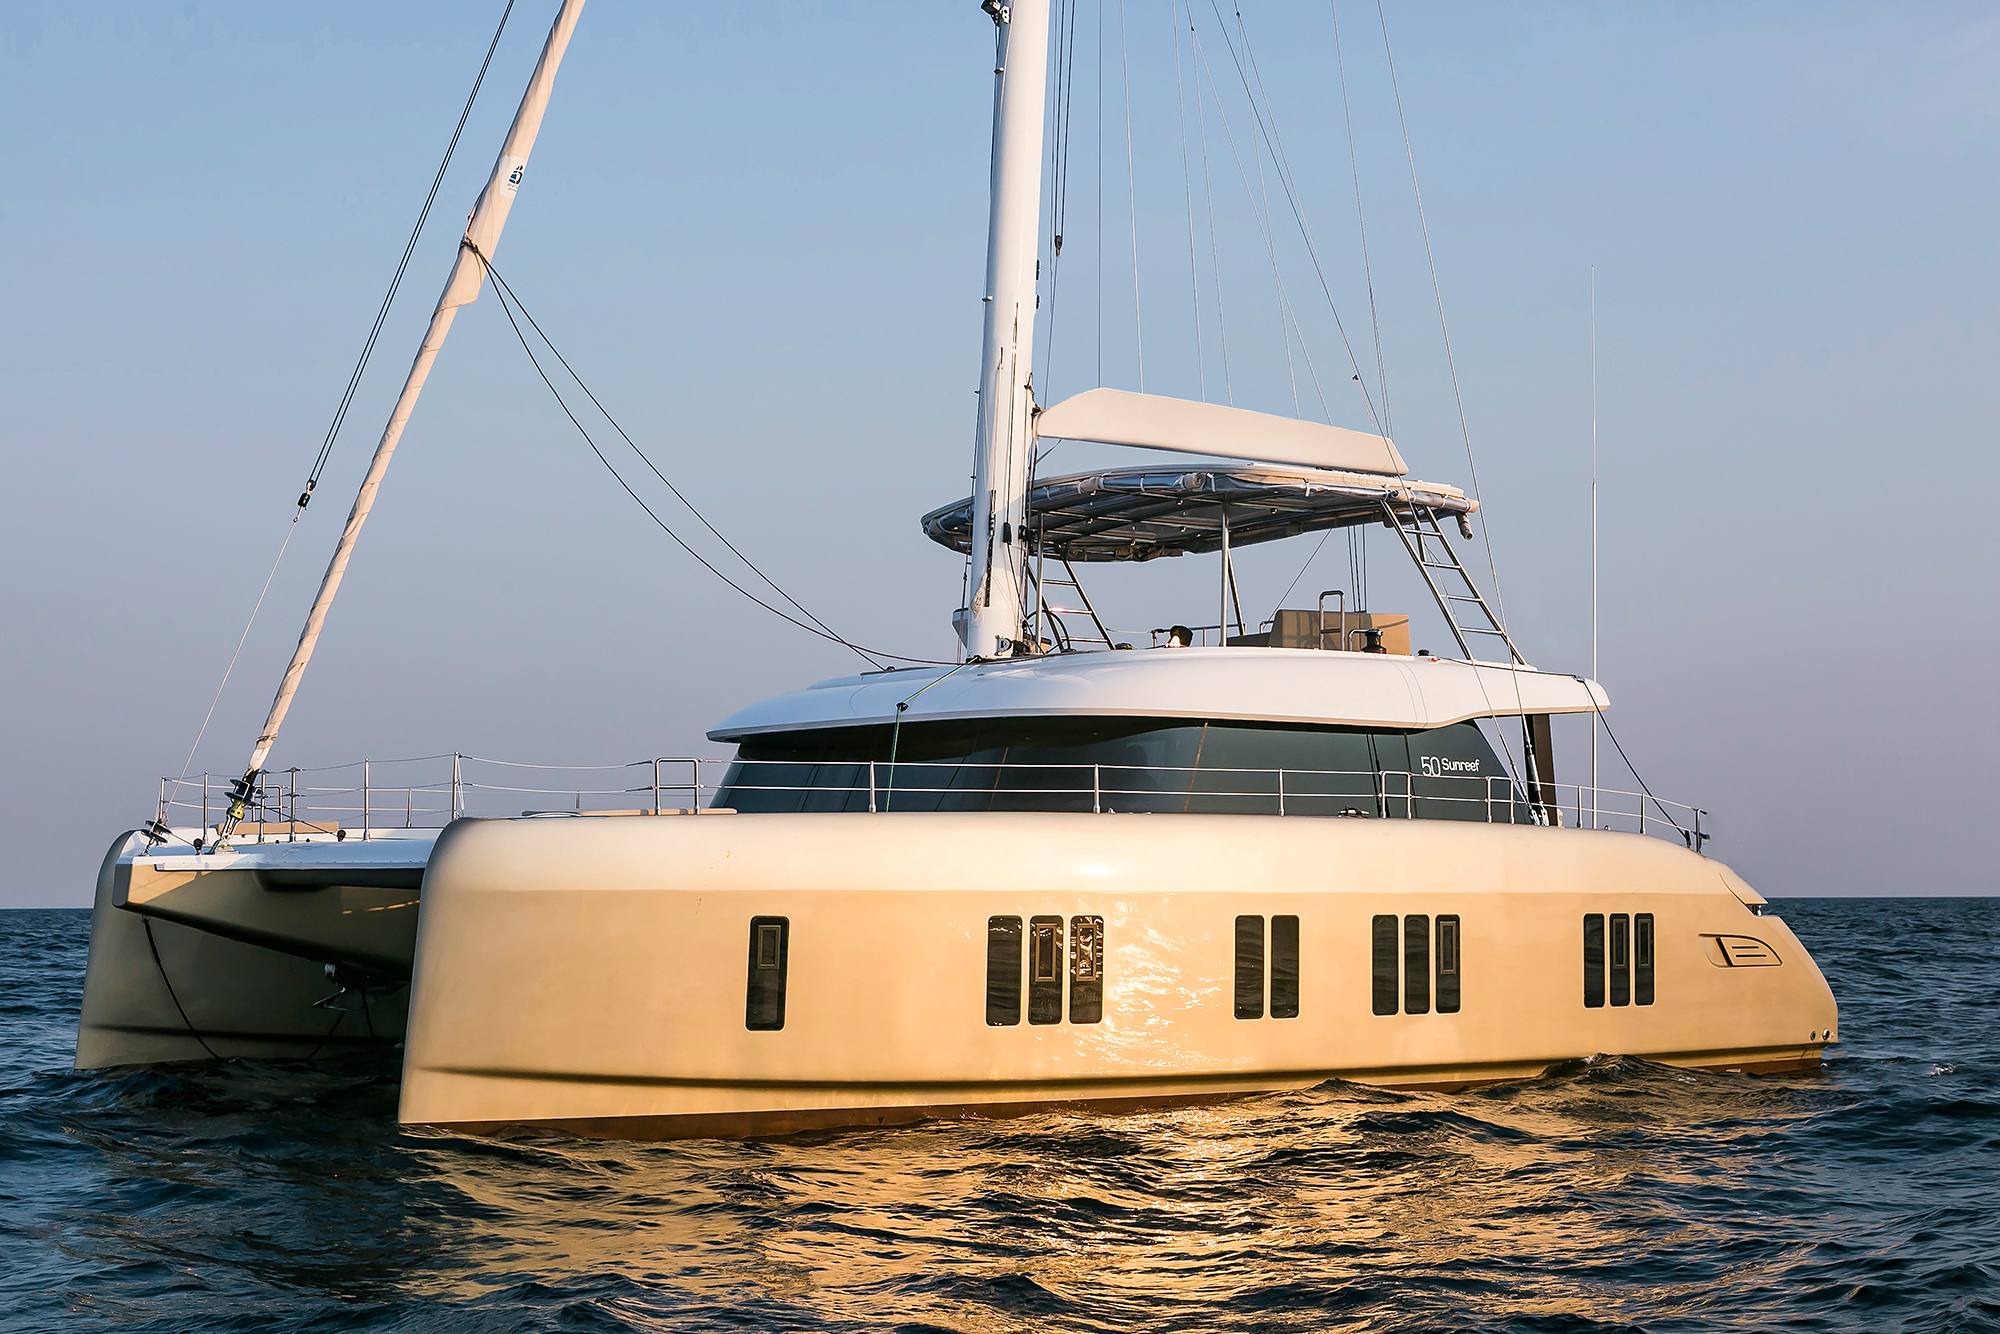 Launched Sail  for Sale  Sunreef 50 